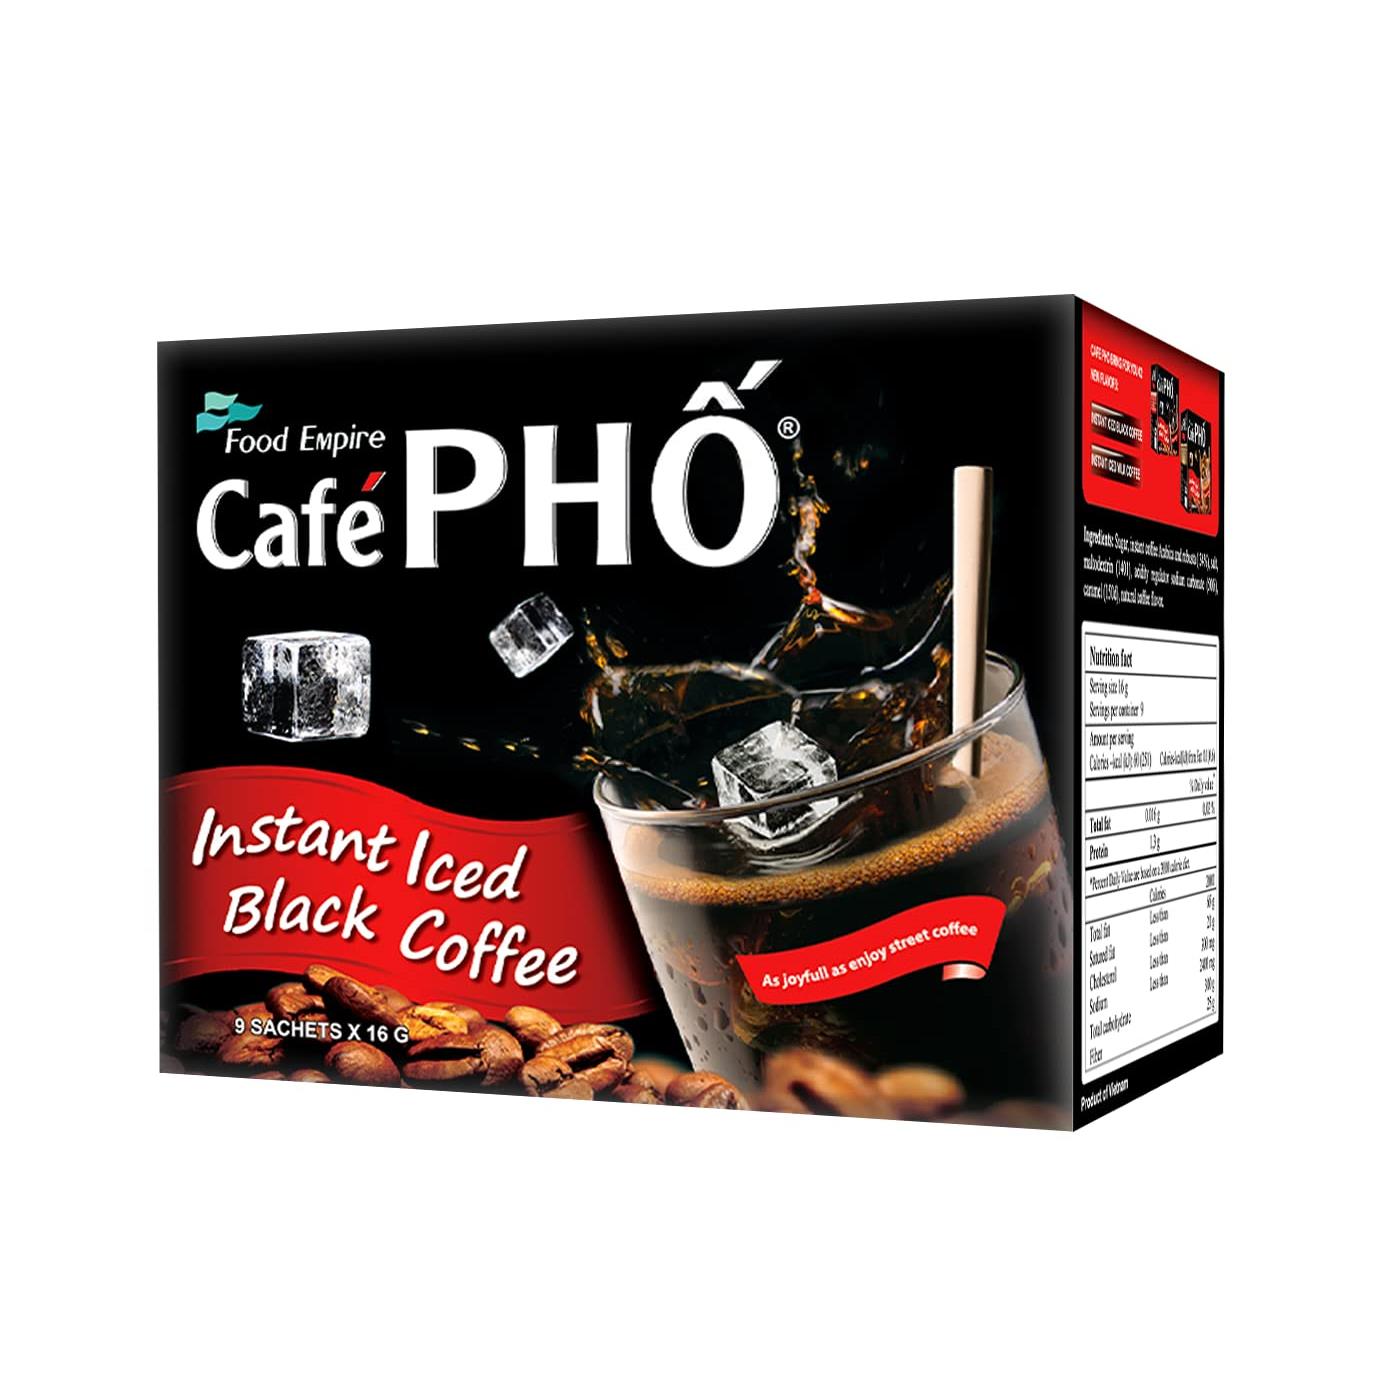 Cafe Pho Vietnamese Instant Coffee Mix, Iced Black Coffee, Cafe Den Da, Single Serve Coffee Packets, Box of 9 Sachets, Pack of 1